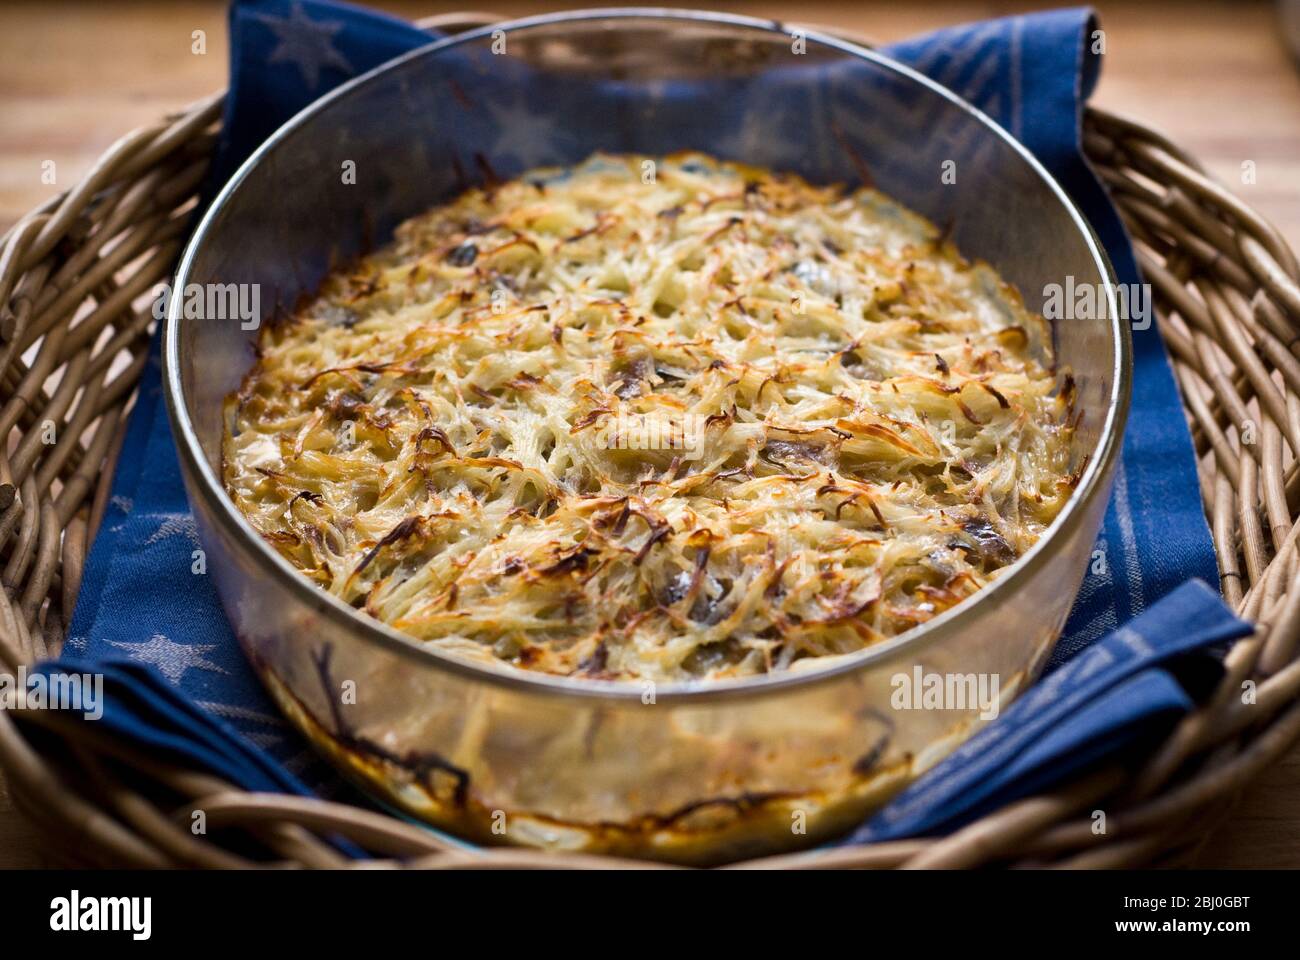 Jansson's Temptation', (Janssons Frestelse) a classic Swedish dish of potato, onion and Swedish 'anchovies' - in fact salted sprats. - Stock Photo